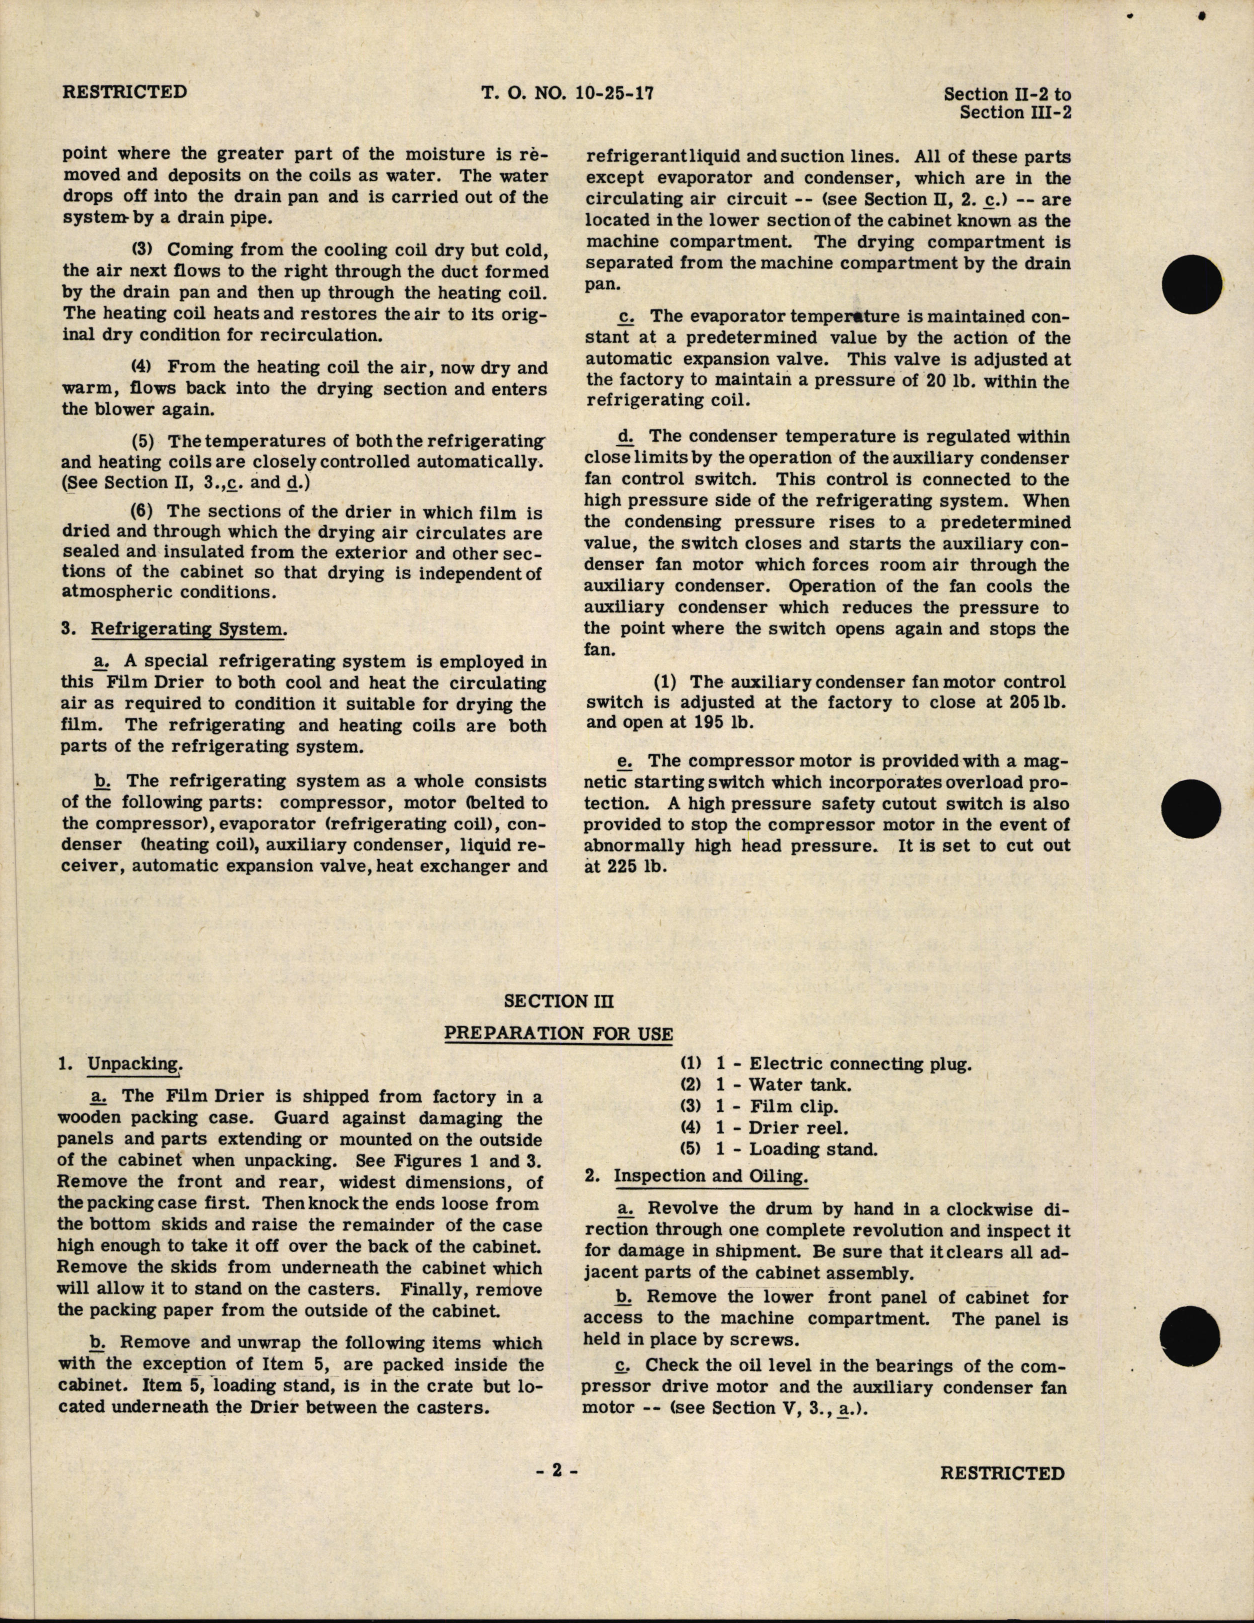 Sample page 8 from AirCorps Library document: Handbook of Instructions with Parts Catalog for Type A-7 Roll Film Dryer